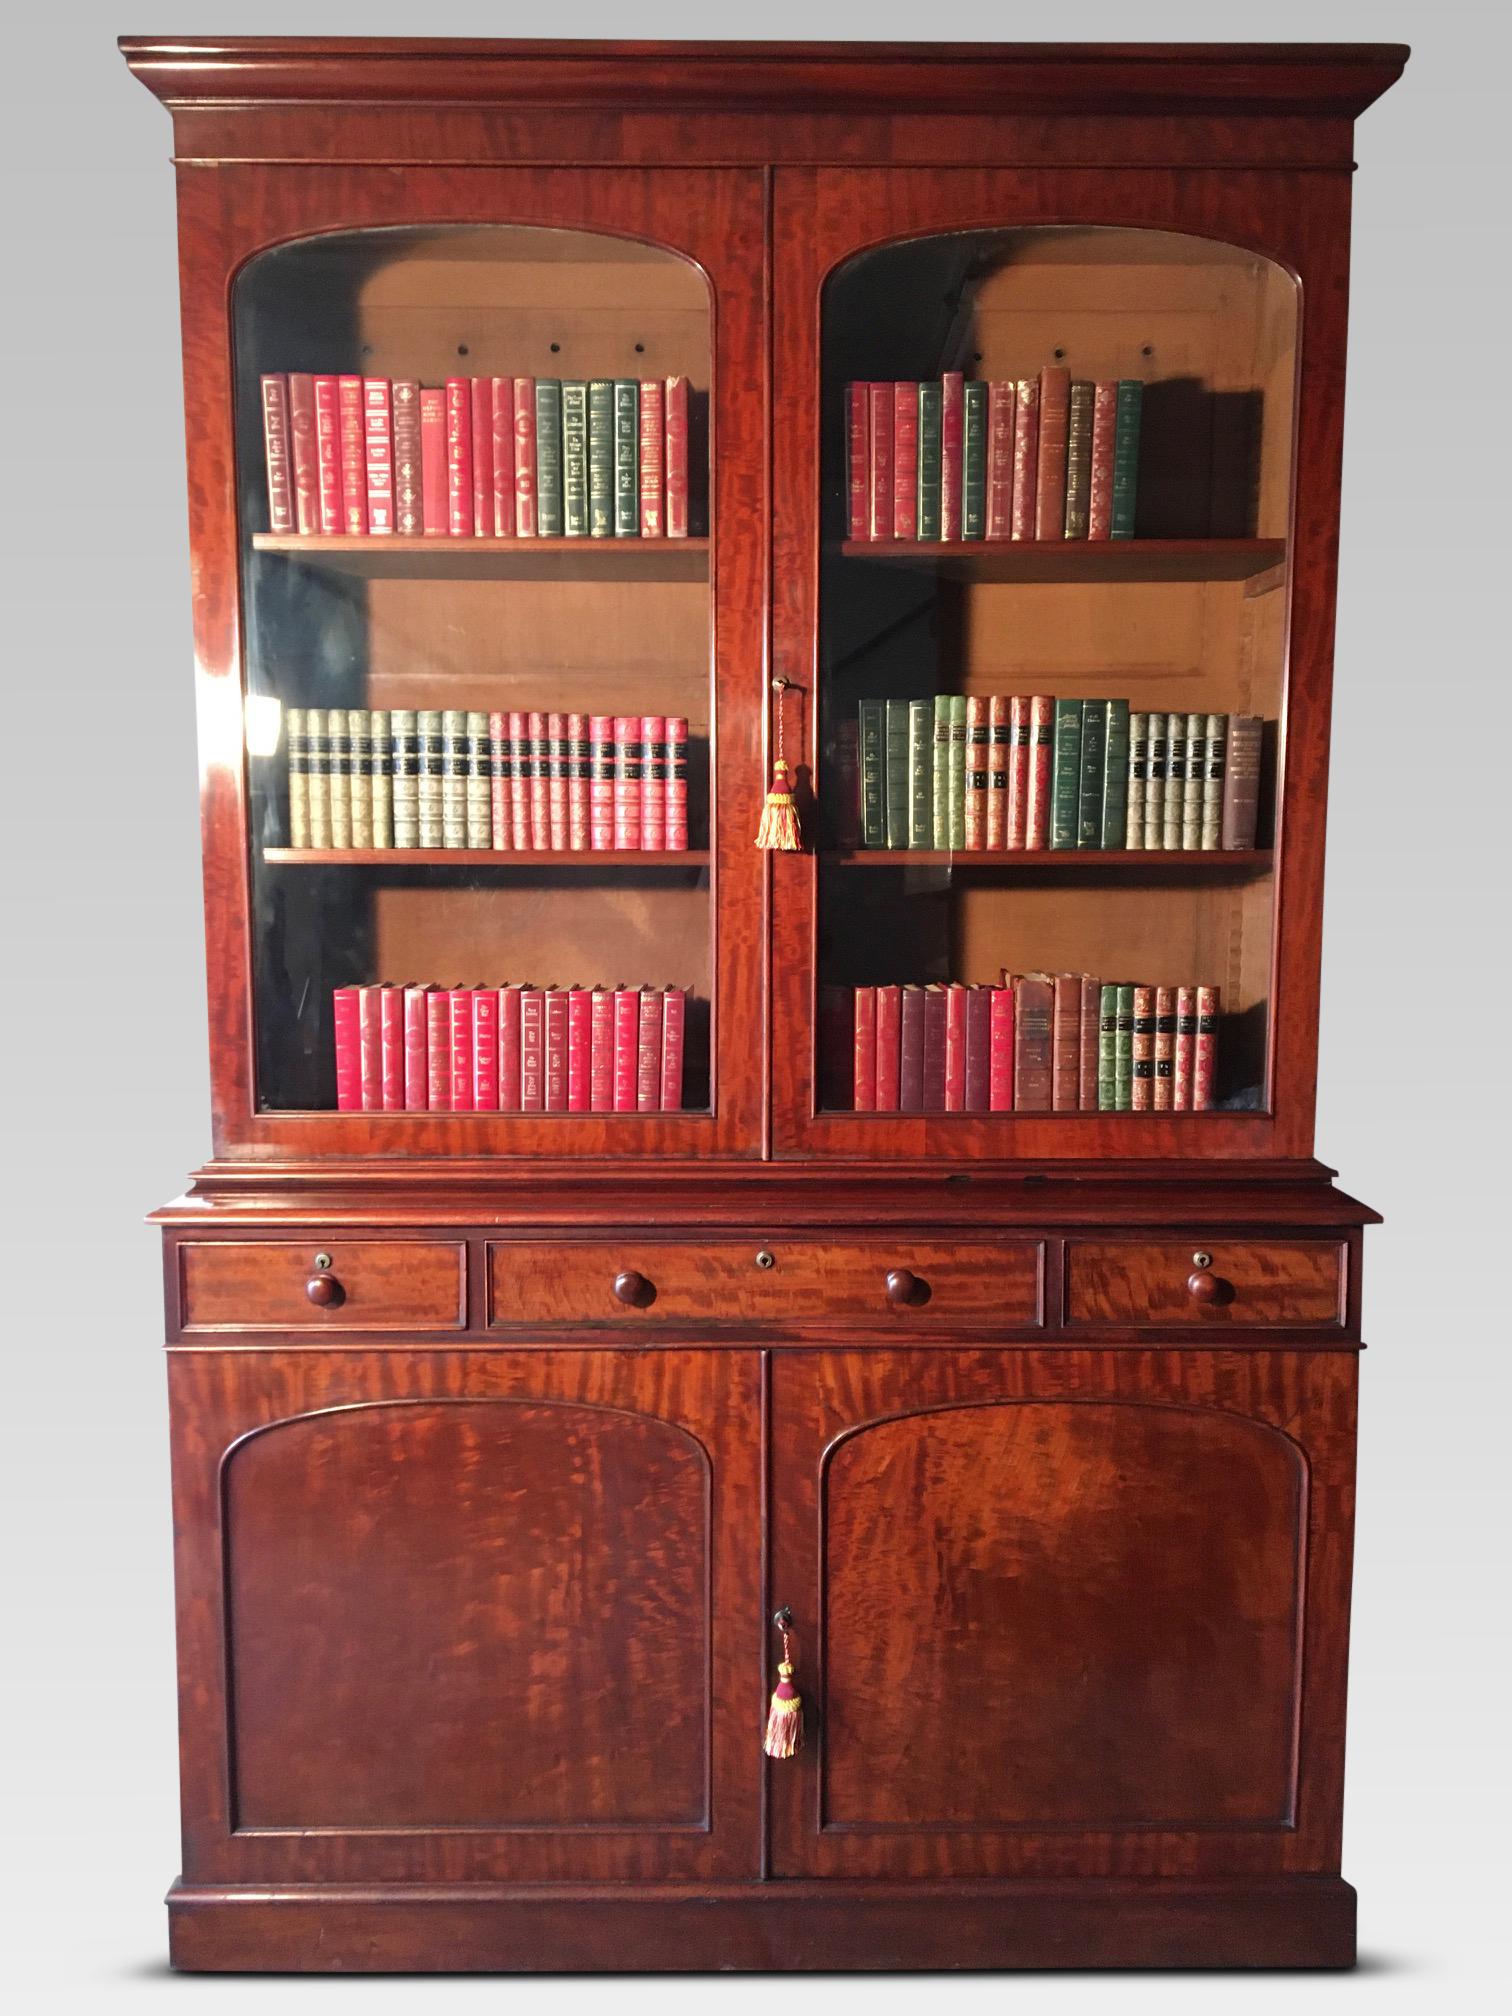 Fine quality English mahogany library bookcase, circa 1840.
This delightful bookcase has a marvellous grain and antique patination. It was sourced from
a large London property and had been well maintained. We have simply cleaned and
wax polished it